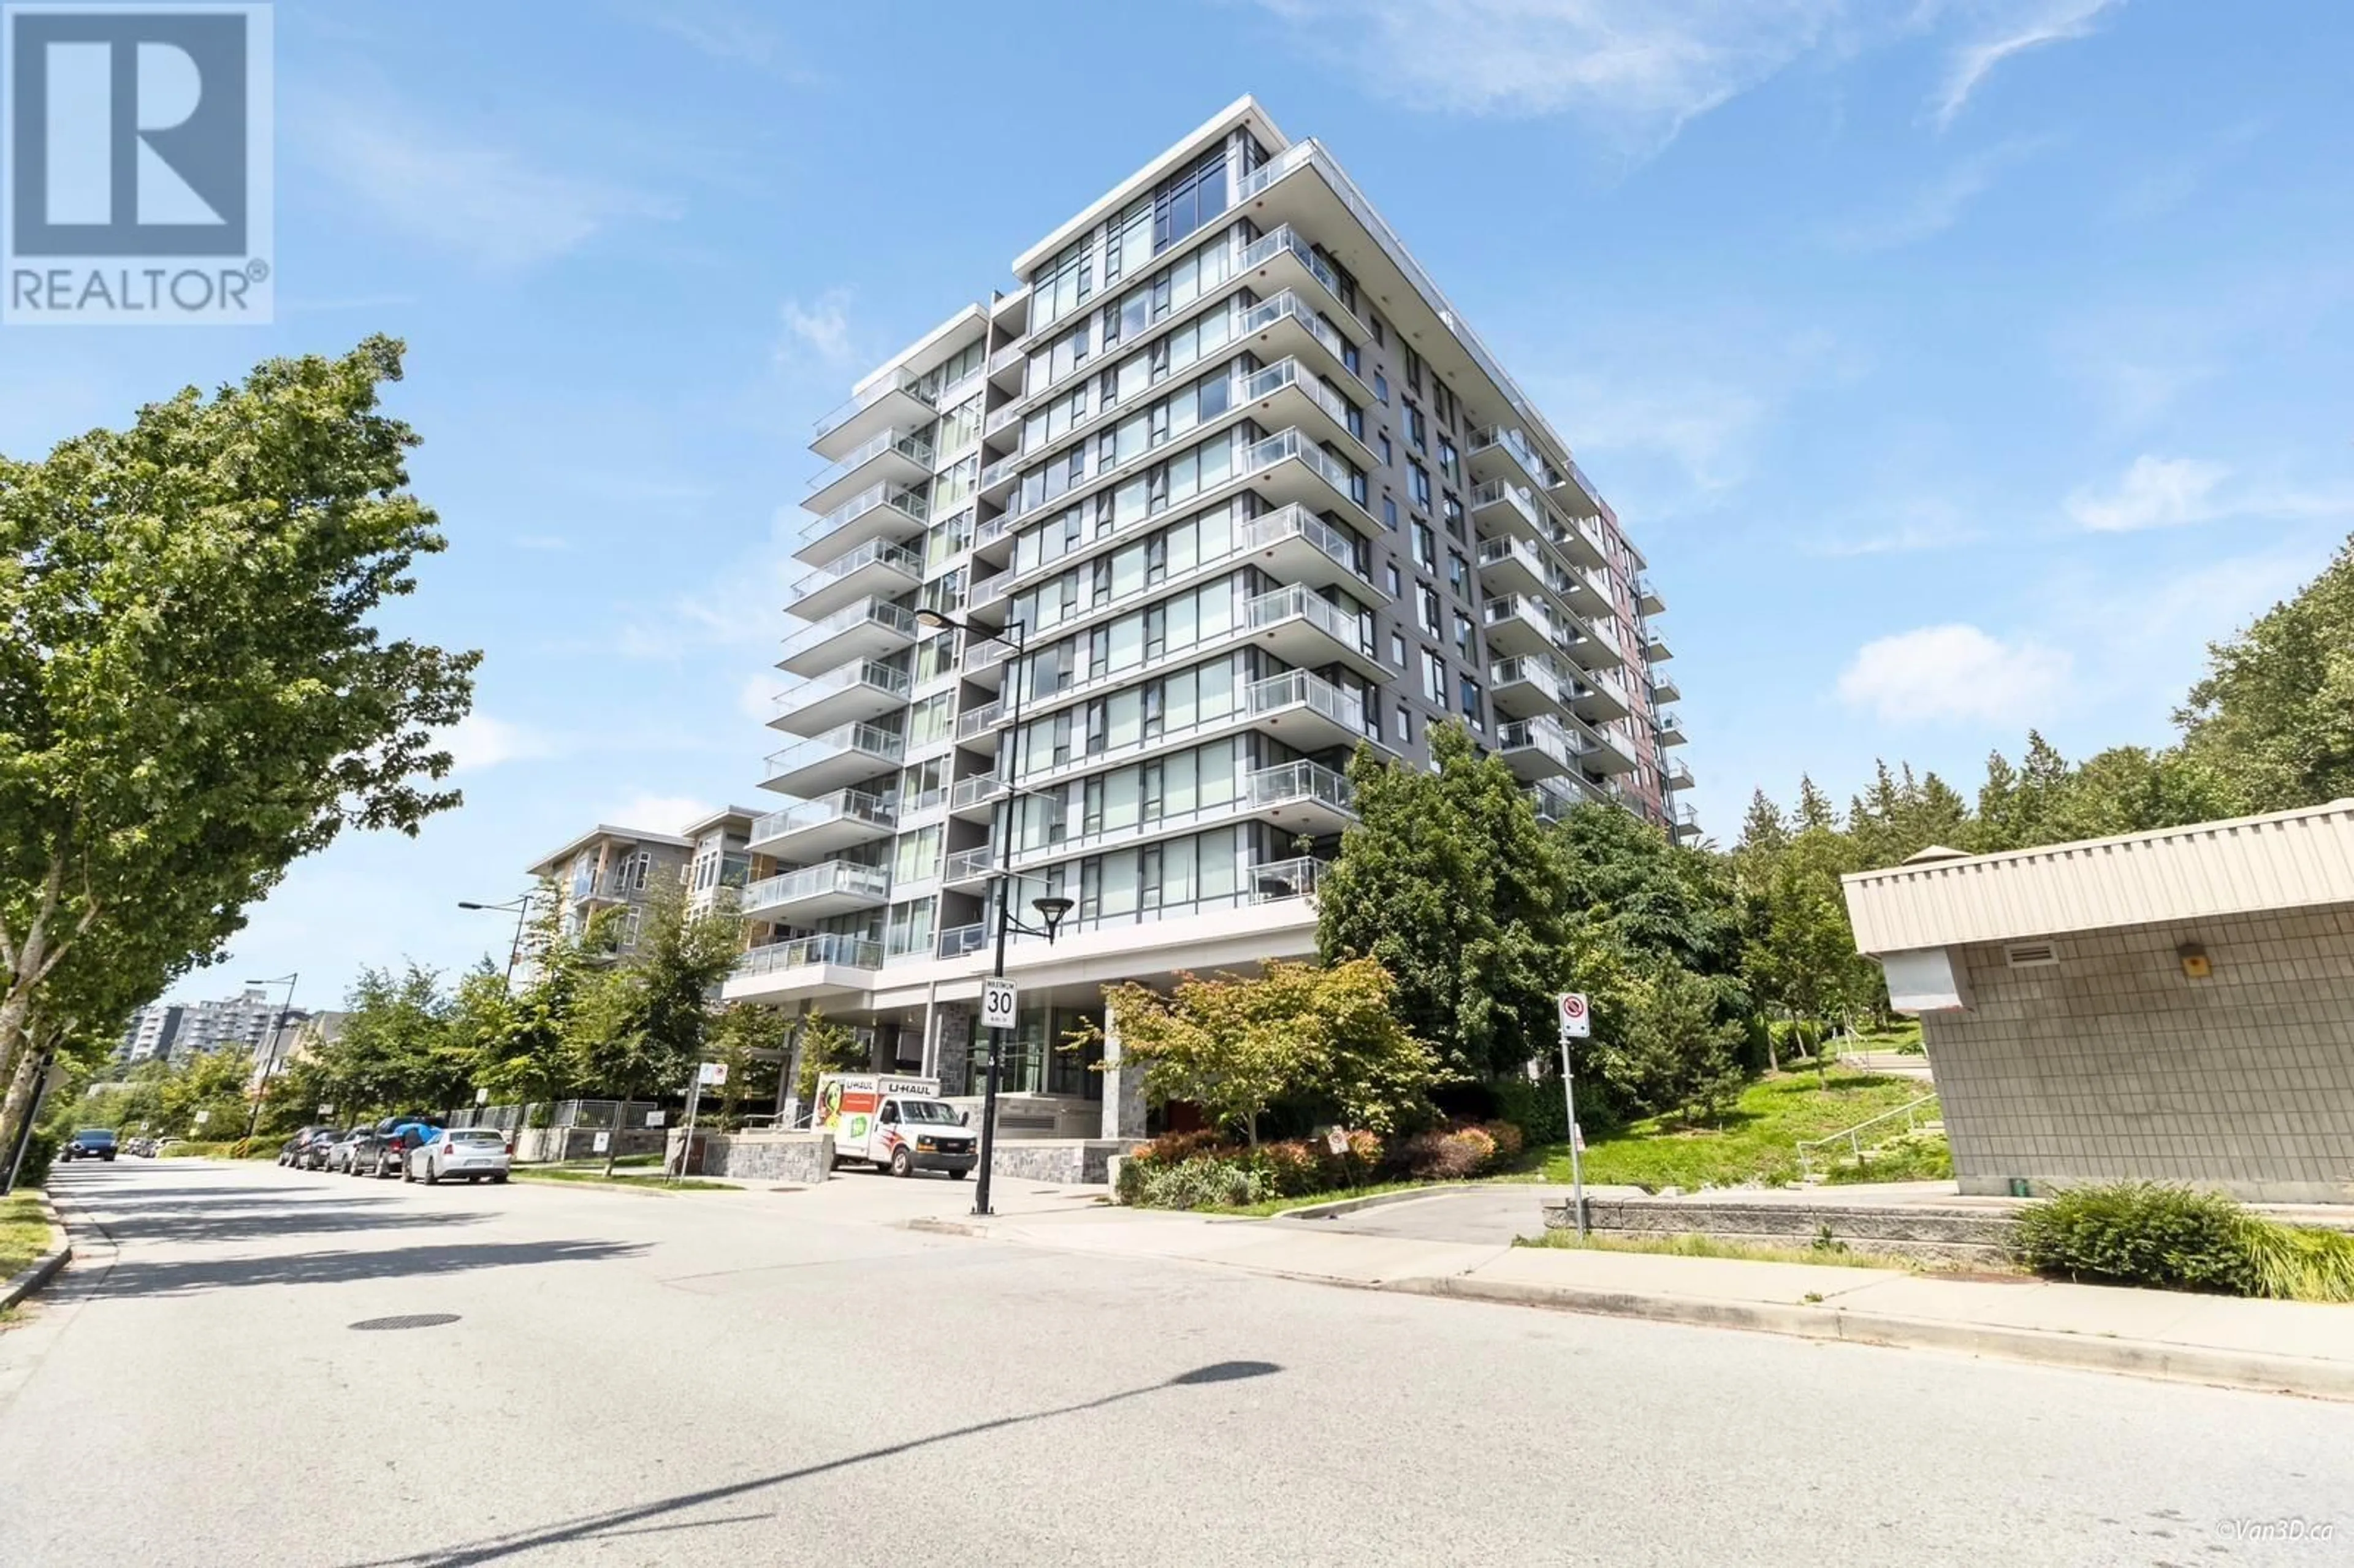 A pic from exterior of the house or condo for 606 3281 E KENT AVENUE NORTH, Vancouver British Columbia V5S0C4